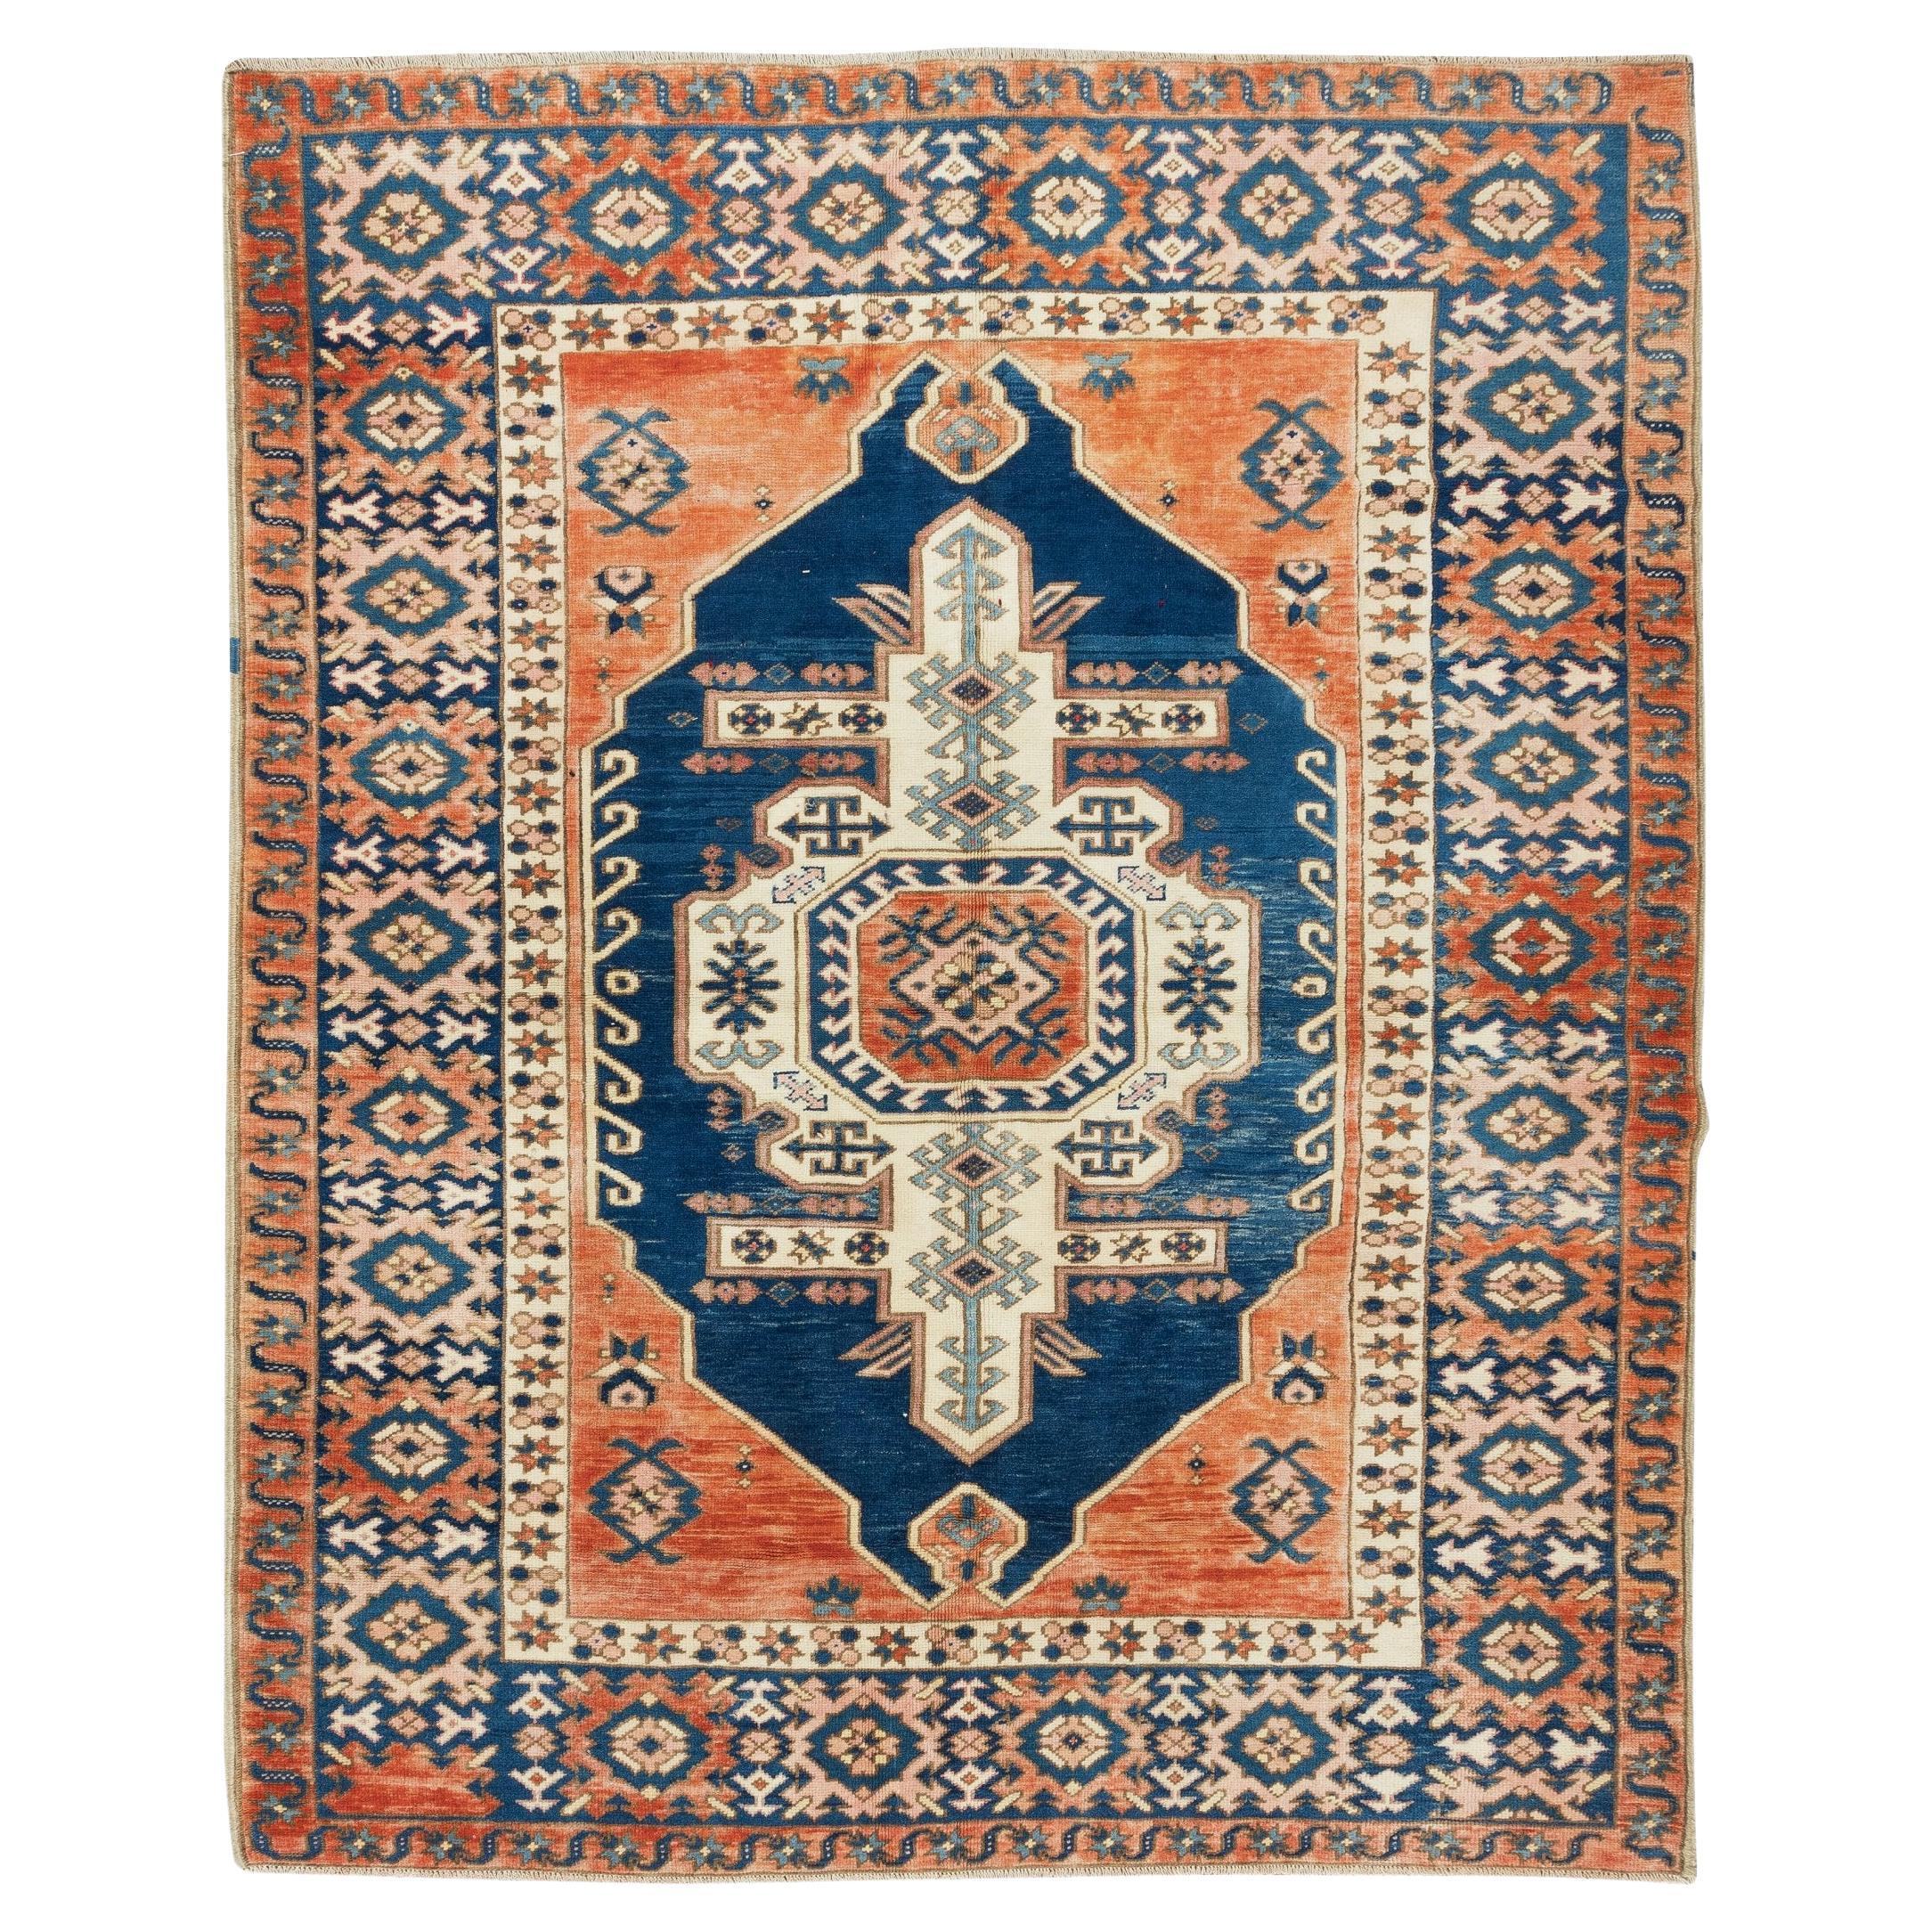 5.9x7.6 Ft Hand-Made Turkish Wool Area Rug, Mid-Century Geometric Pattern Carpet For Sale